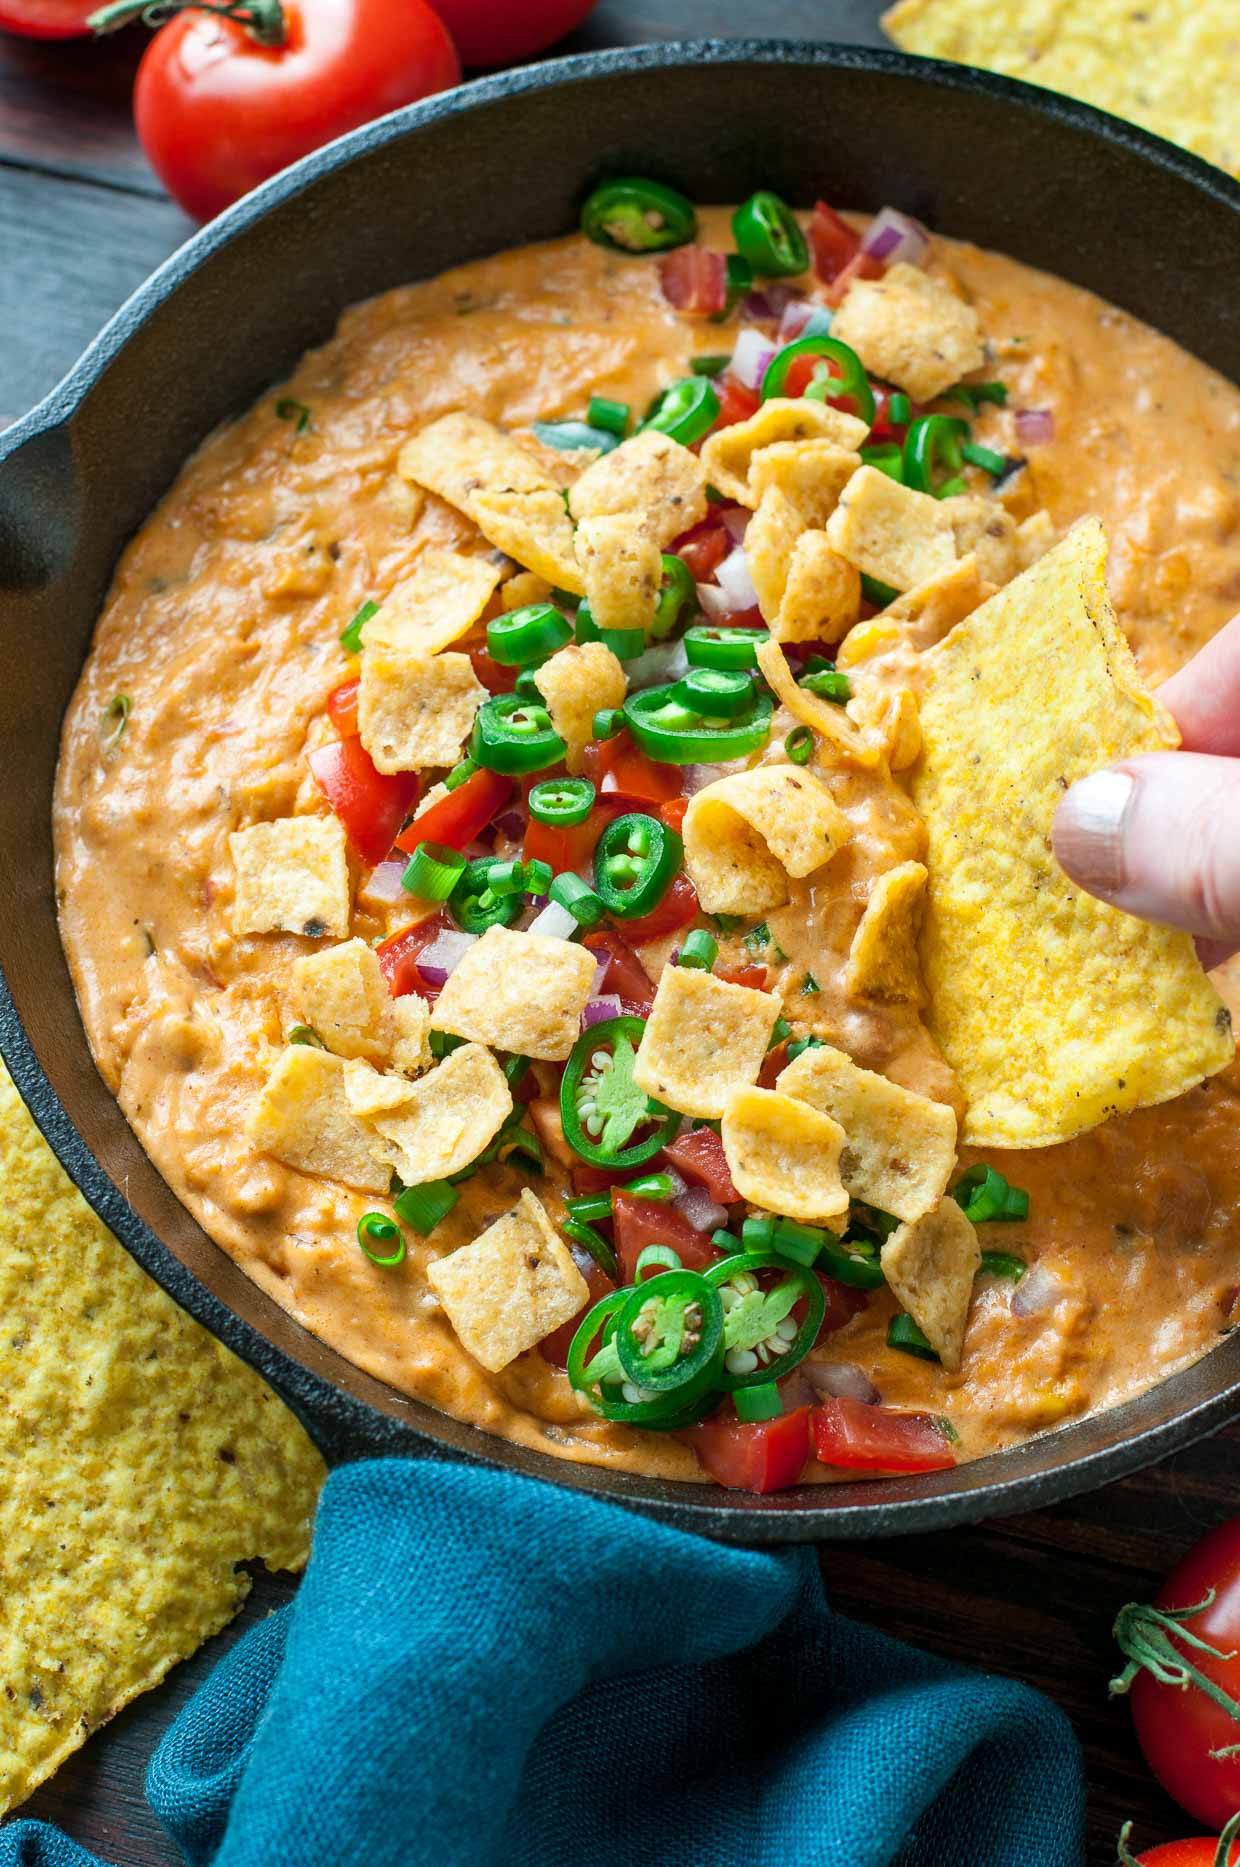 Easy Vegetarian Chili Cheese Dip... with NO VELVEETA! This easy cheesy dip is sketch-free and delicious!